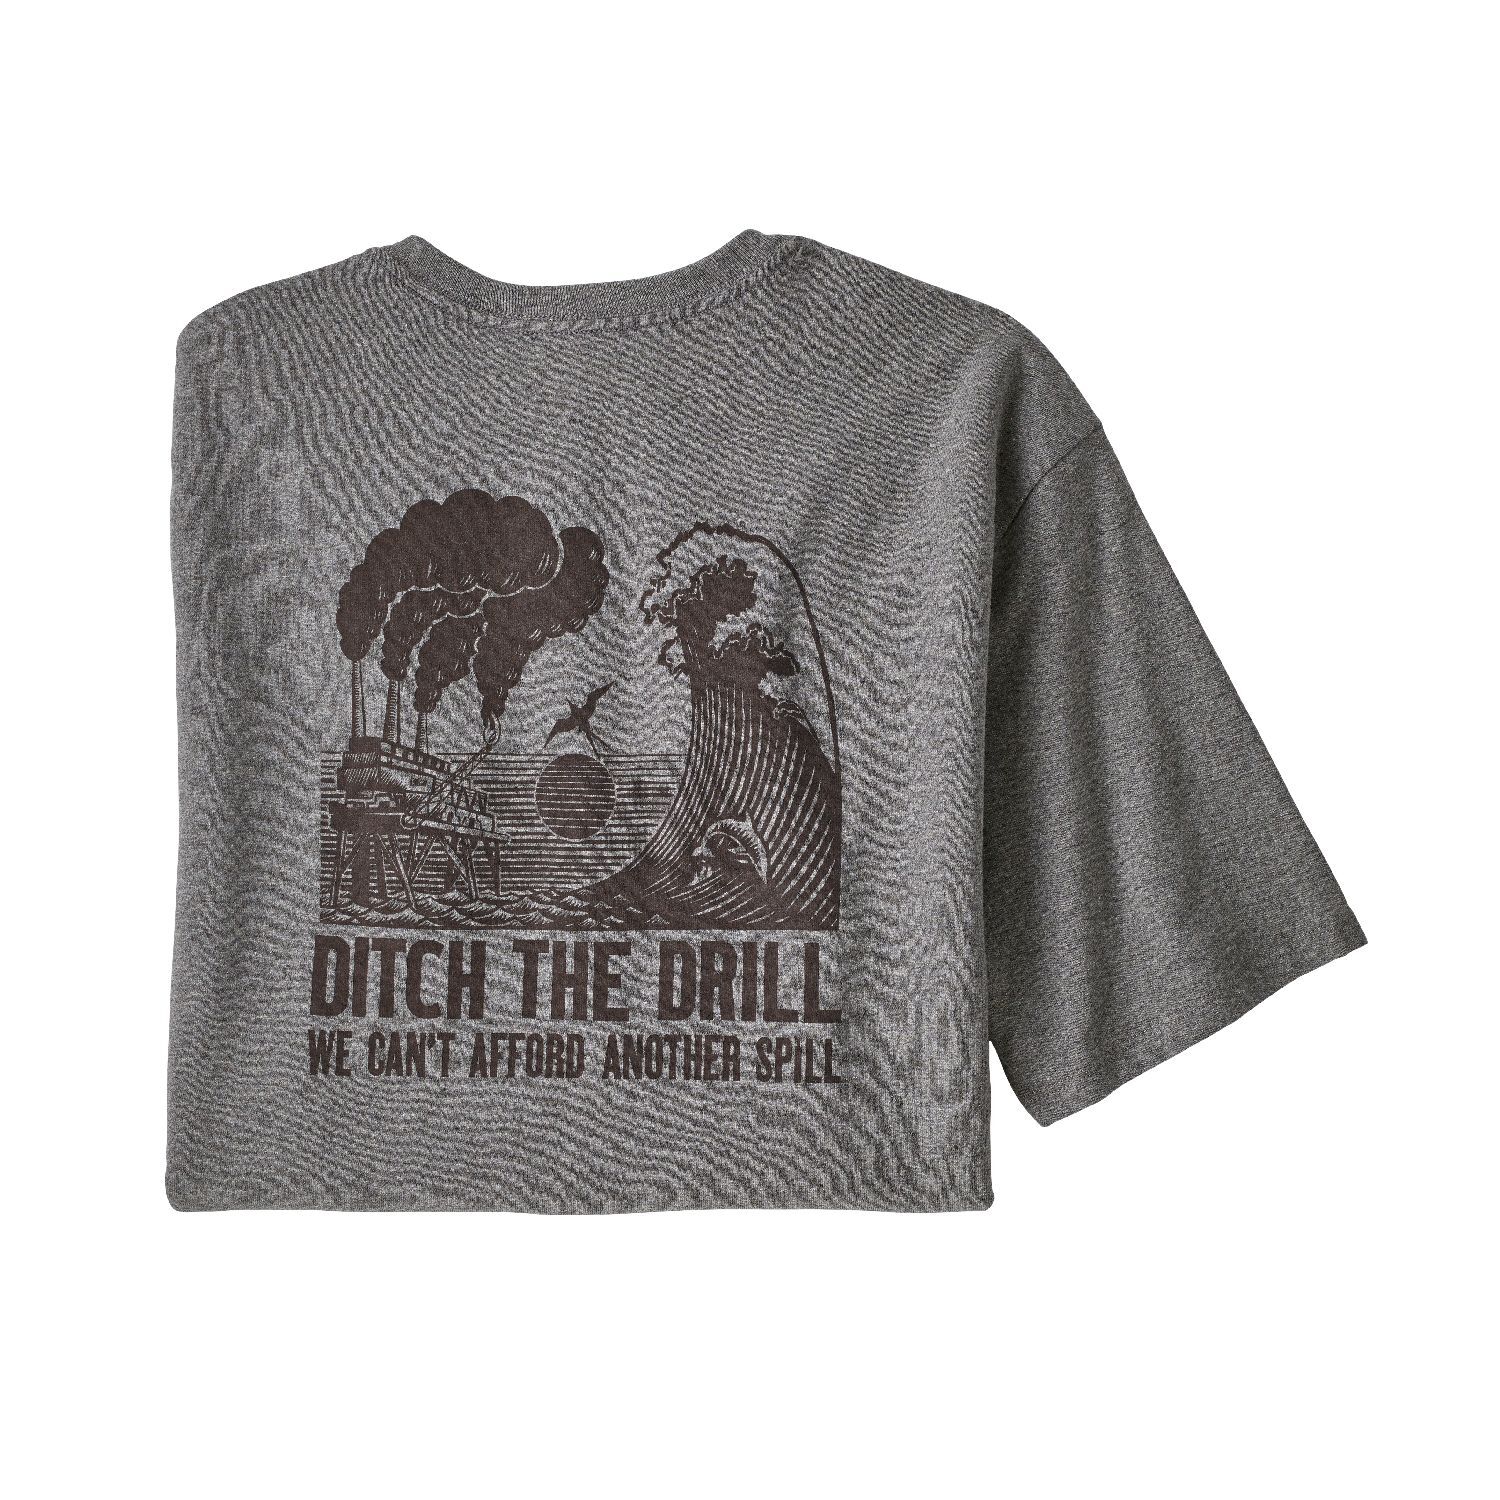 Patagonia Ditch The Drill Responsibili-Tee - T-shirt Herrer